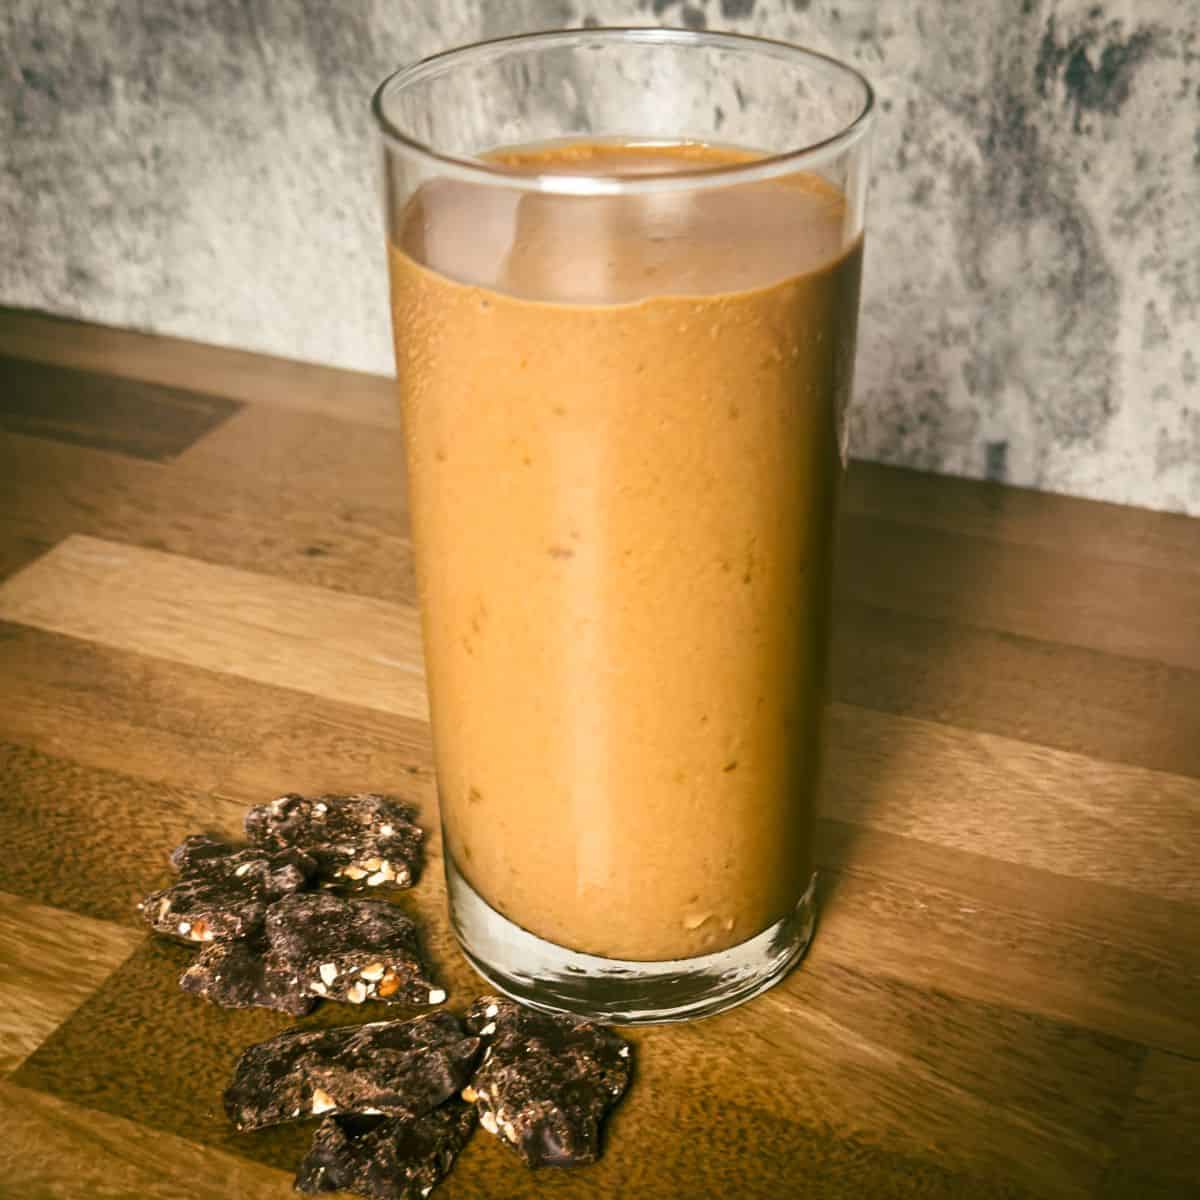 he completed Tropical Smoothie Peanut Butter Cup in a clear glass, with a creamy texture and chocolate peanut clusters to the side, on a wooden tabletop.